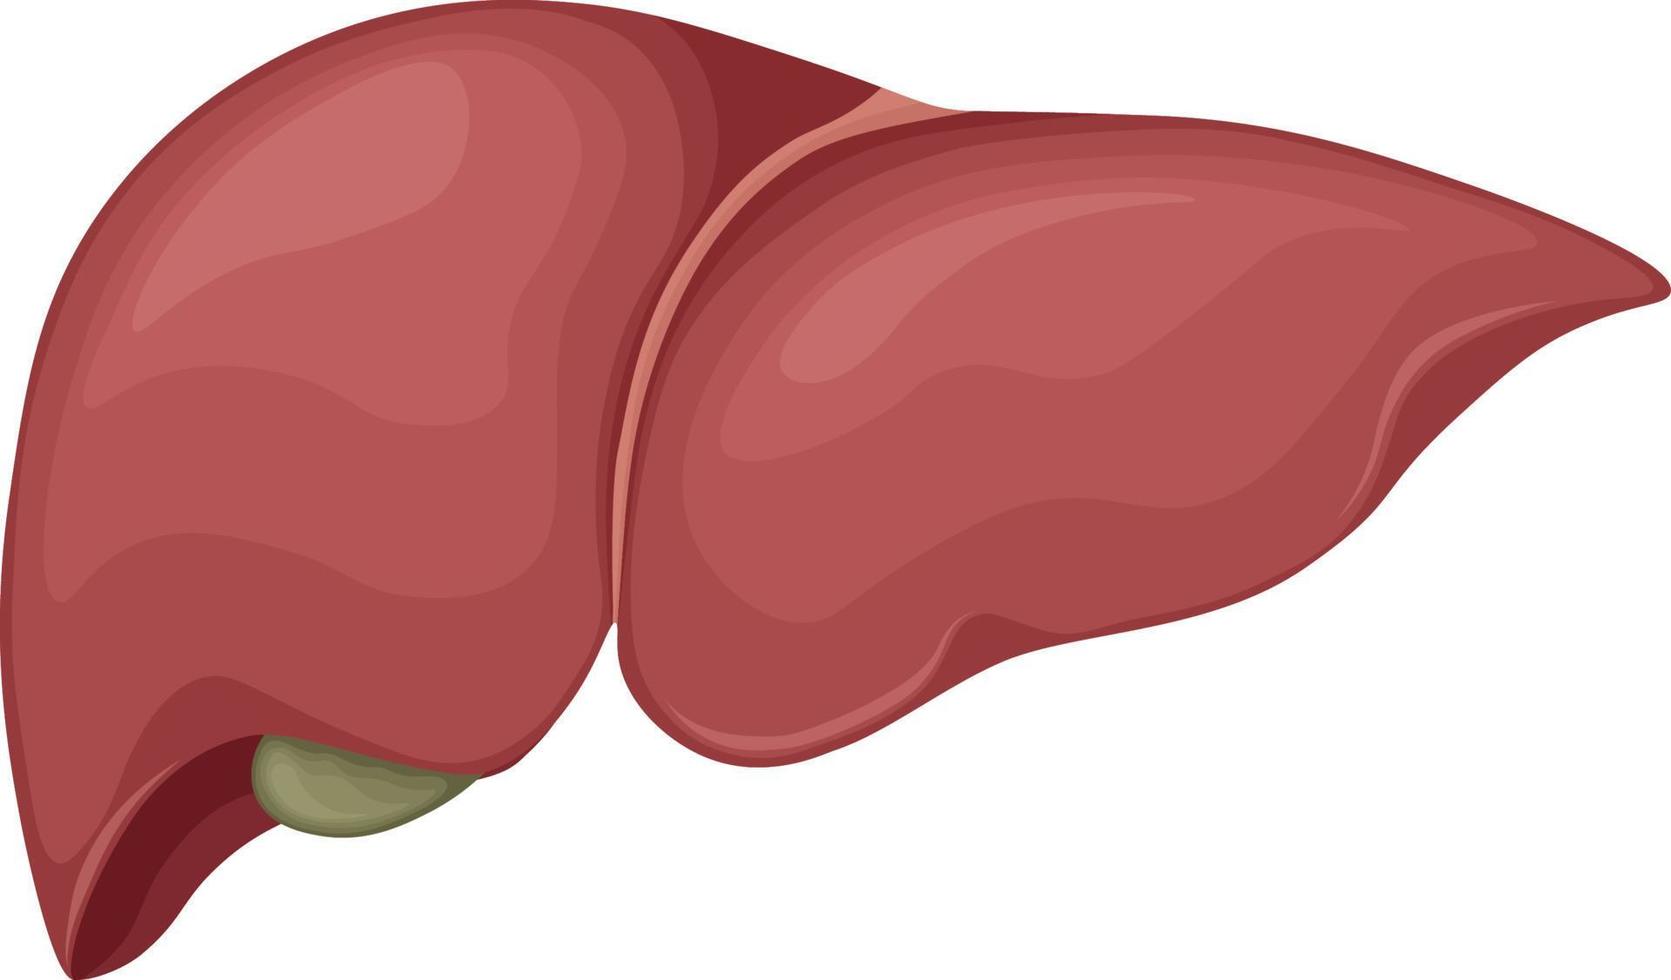 Human liver. Human anatomy. The internal organ of a person. Vector illustration isolated on a white background